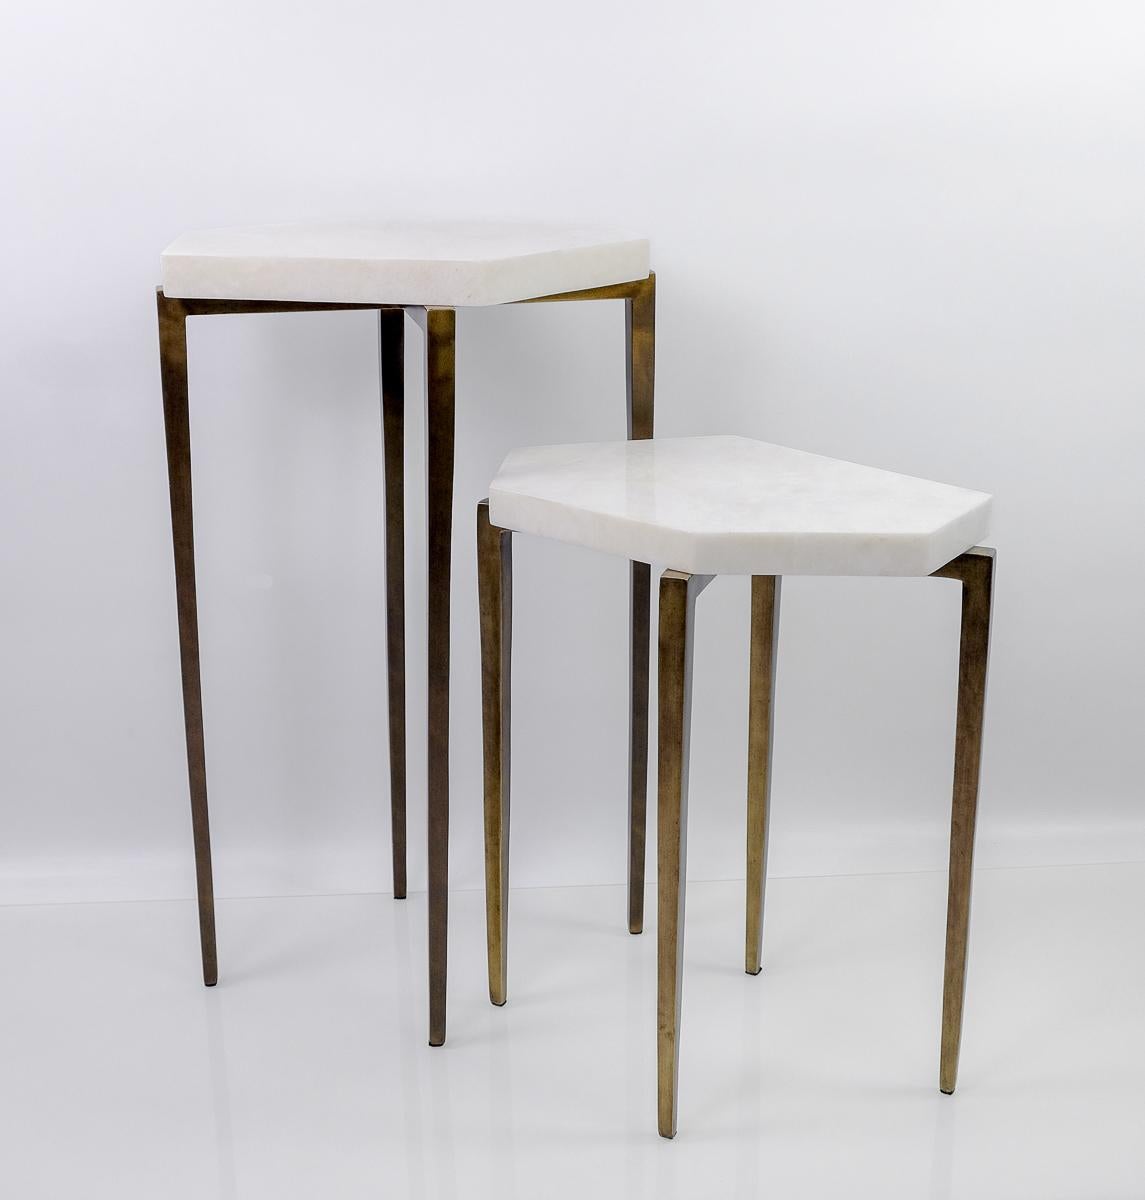 These futurist nesting tables are made of white rock crystal marquetry.

They have a polygonal shape top and the metal feet have an antique brass patina.

The tables are small and very versatile. These can be placed anywhere near a sofa and